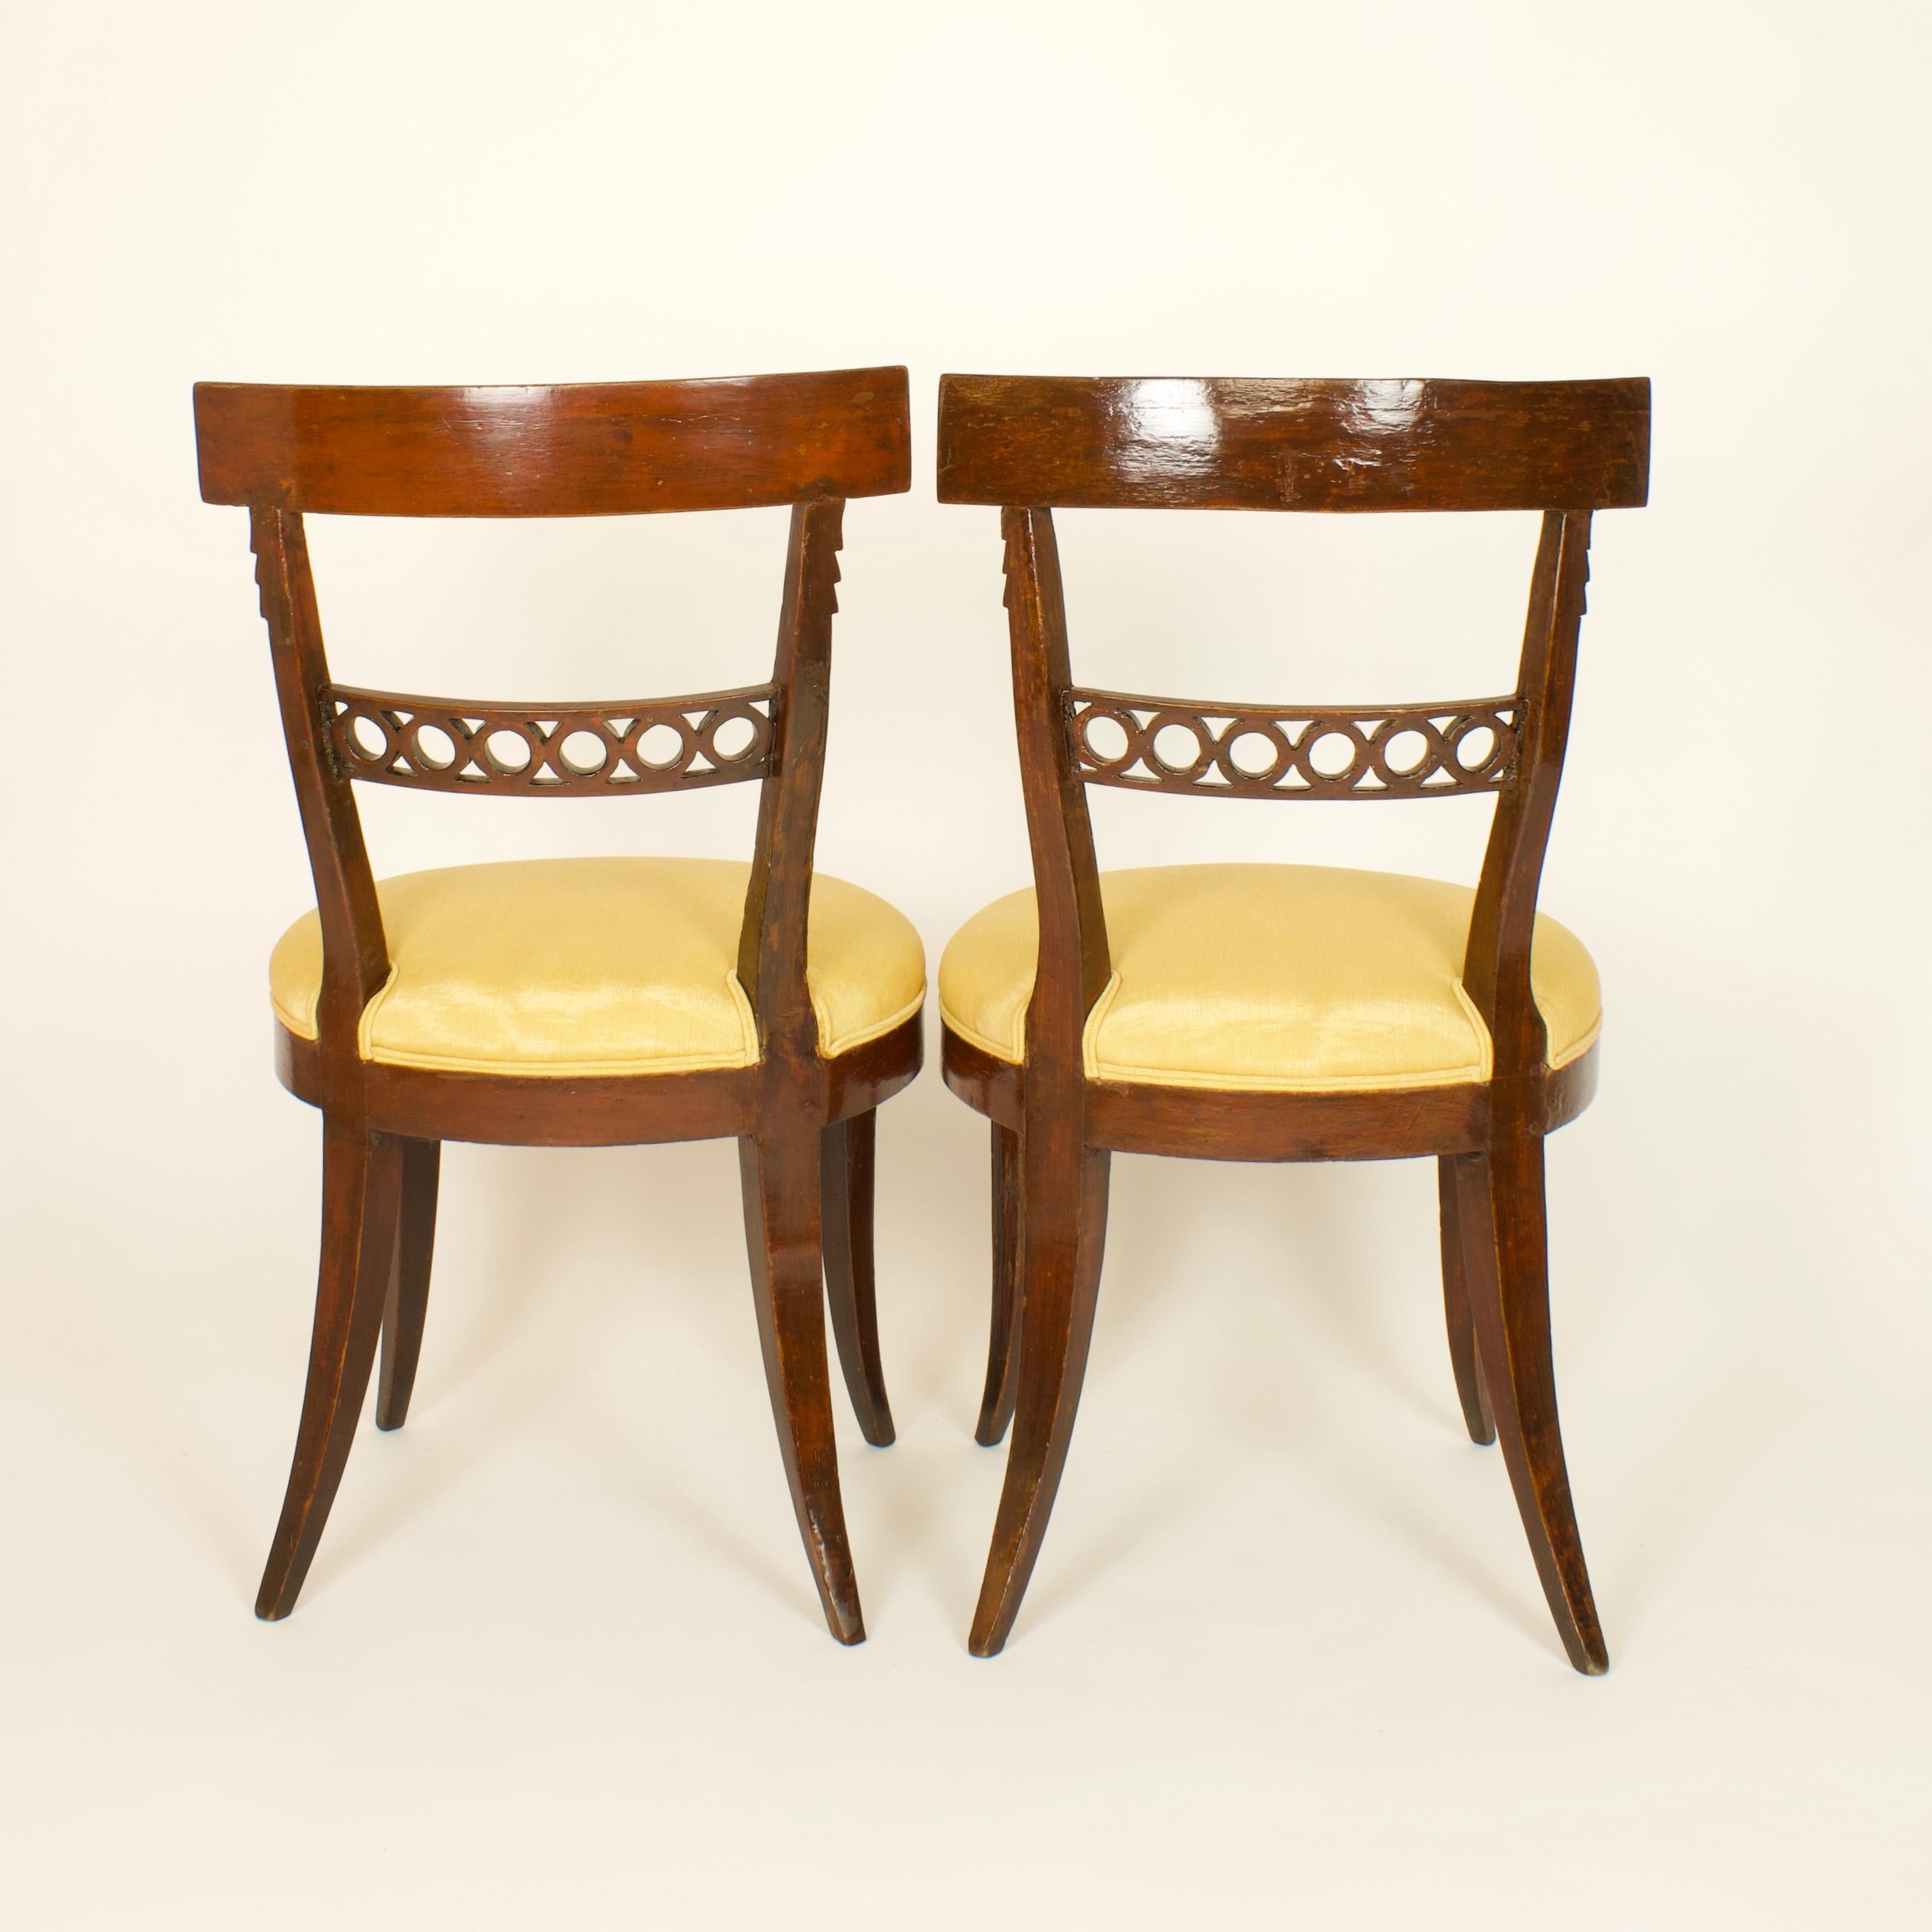 Louis XVI Pair of Late 18th Century Italian Neoclassical Klismos Style Side Chairs For Sale